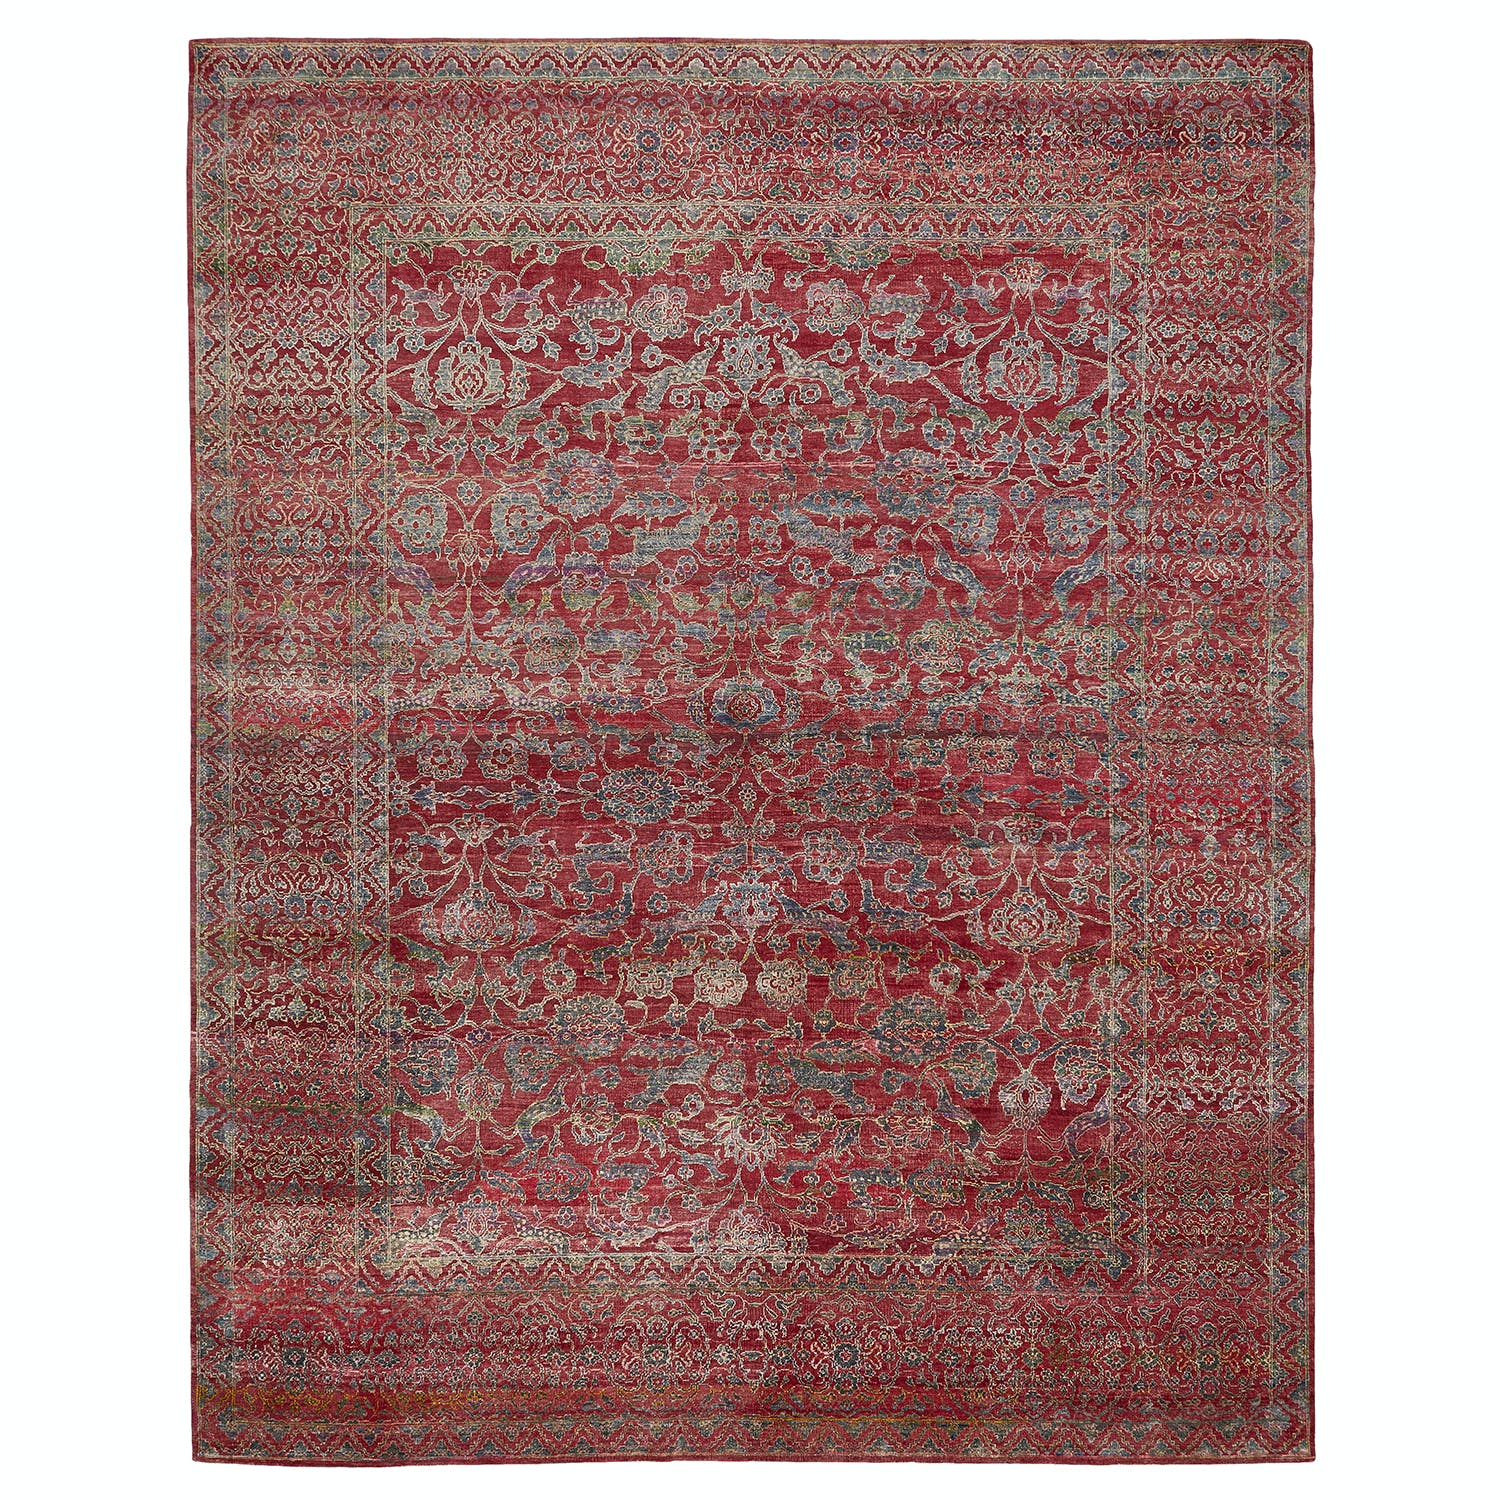 Intricate, symmetrical oriental carpet in rich reds and blues.